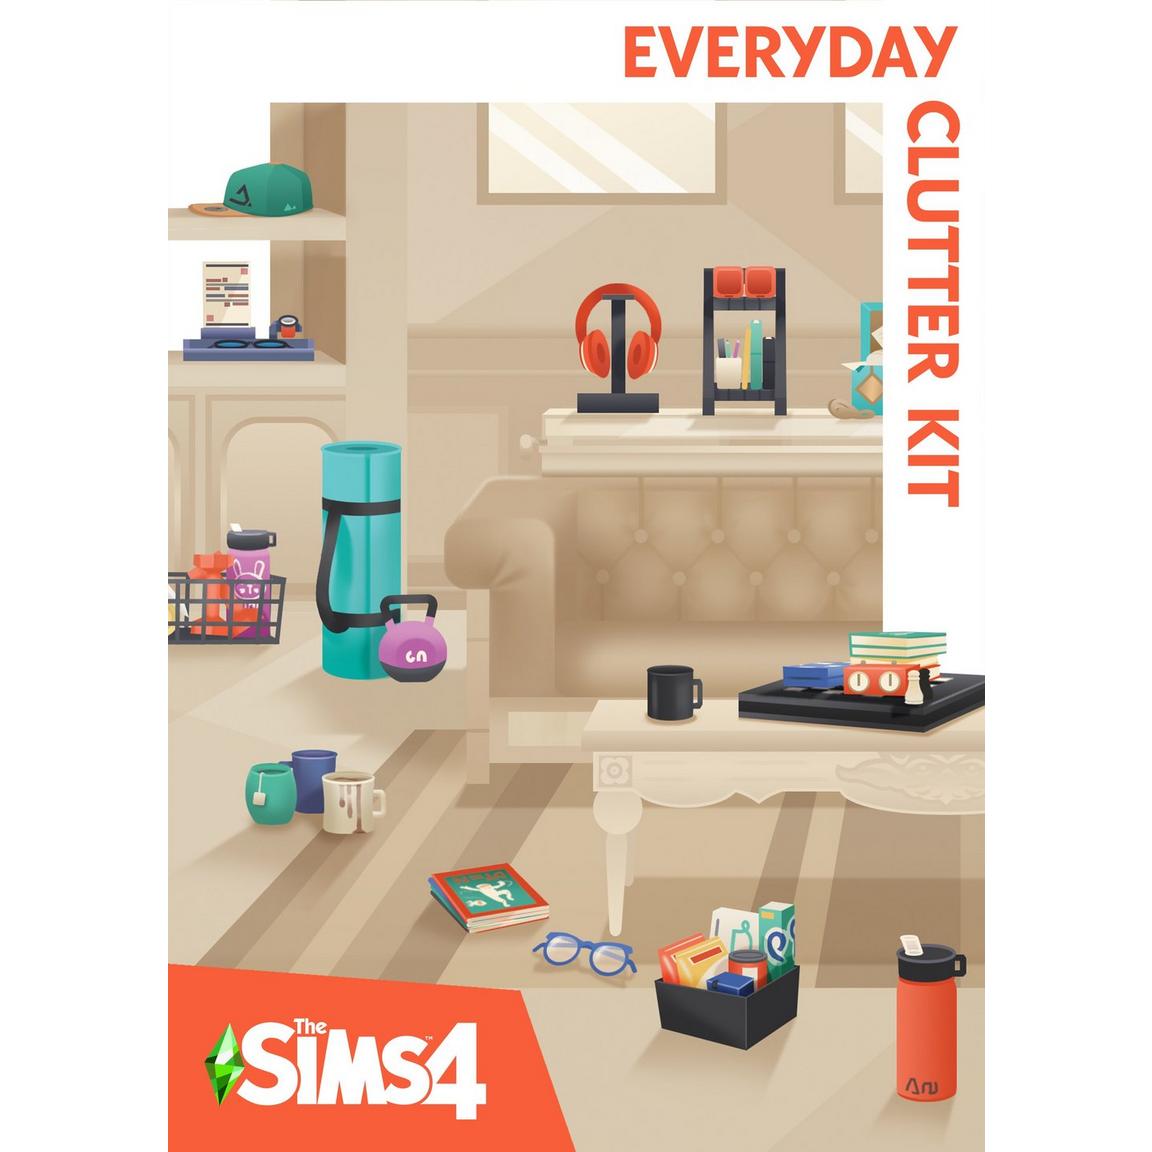 Electronic Arts The Sims 4 Everyday Clutter Kit DLC - PC EA app